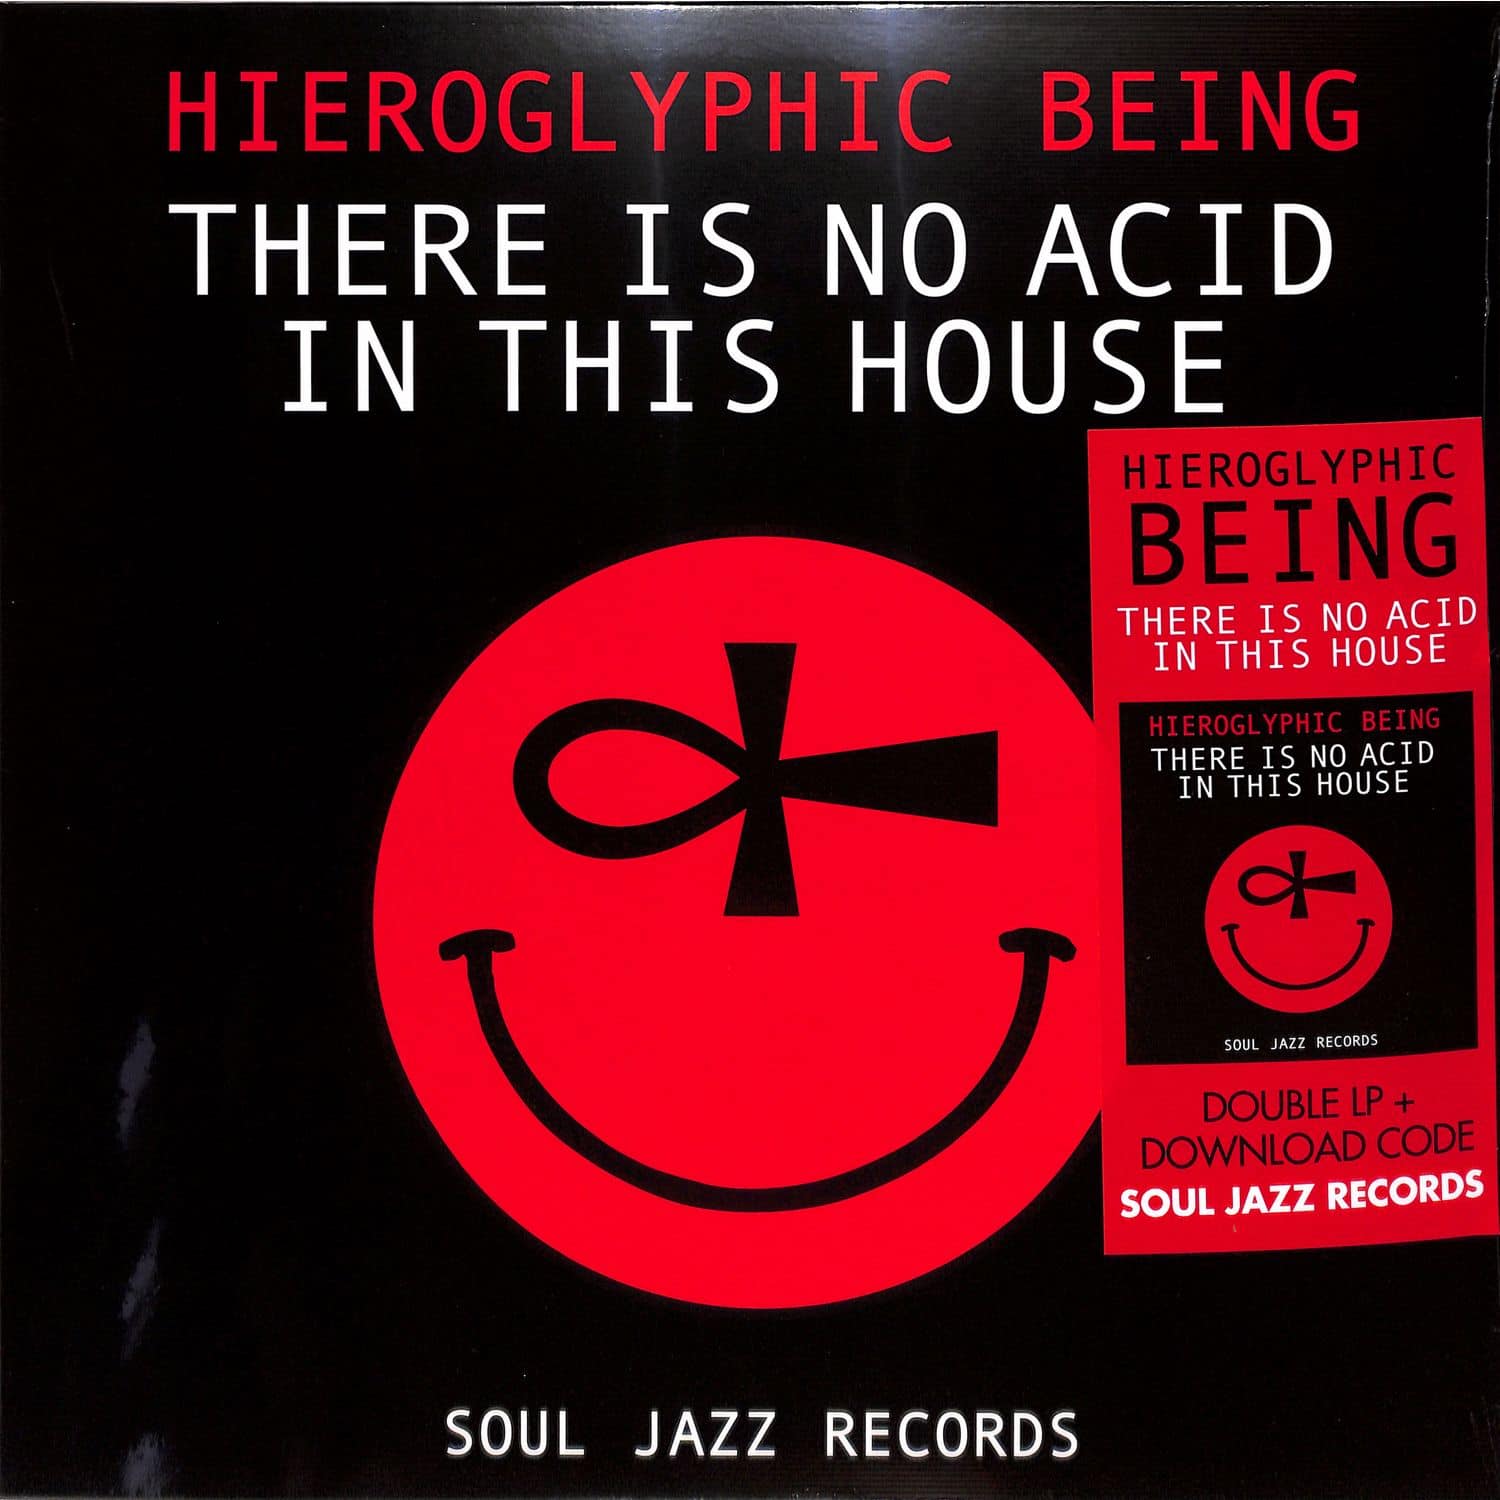 Hieroglyphic Being - THERE IS NO ACID IN THIS HOUSE 